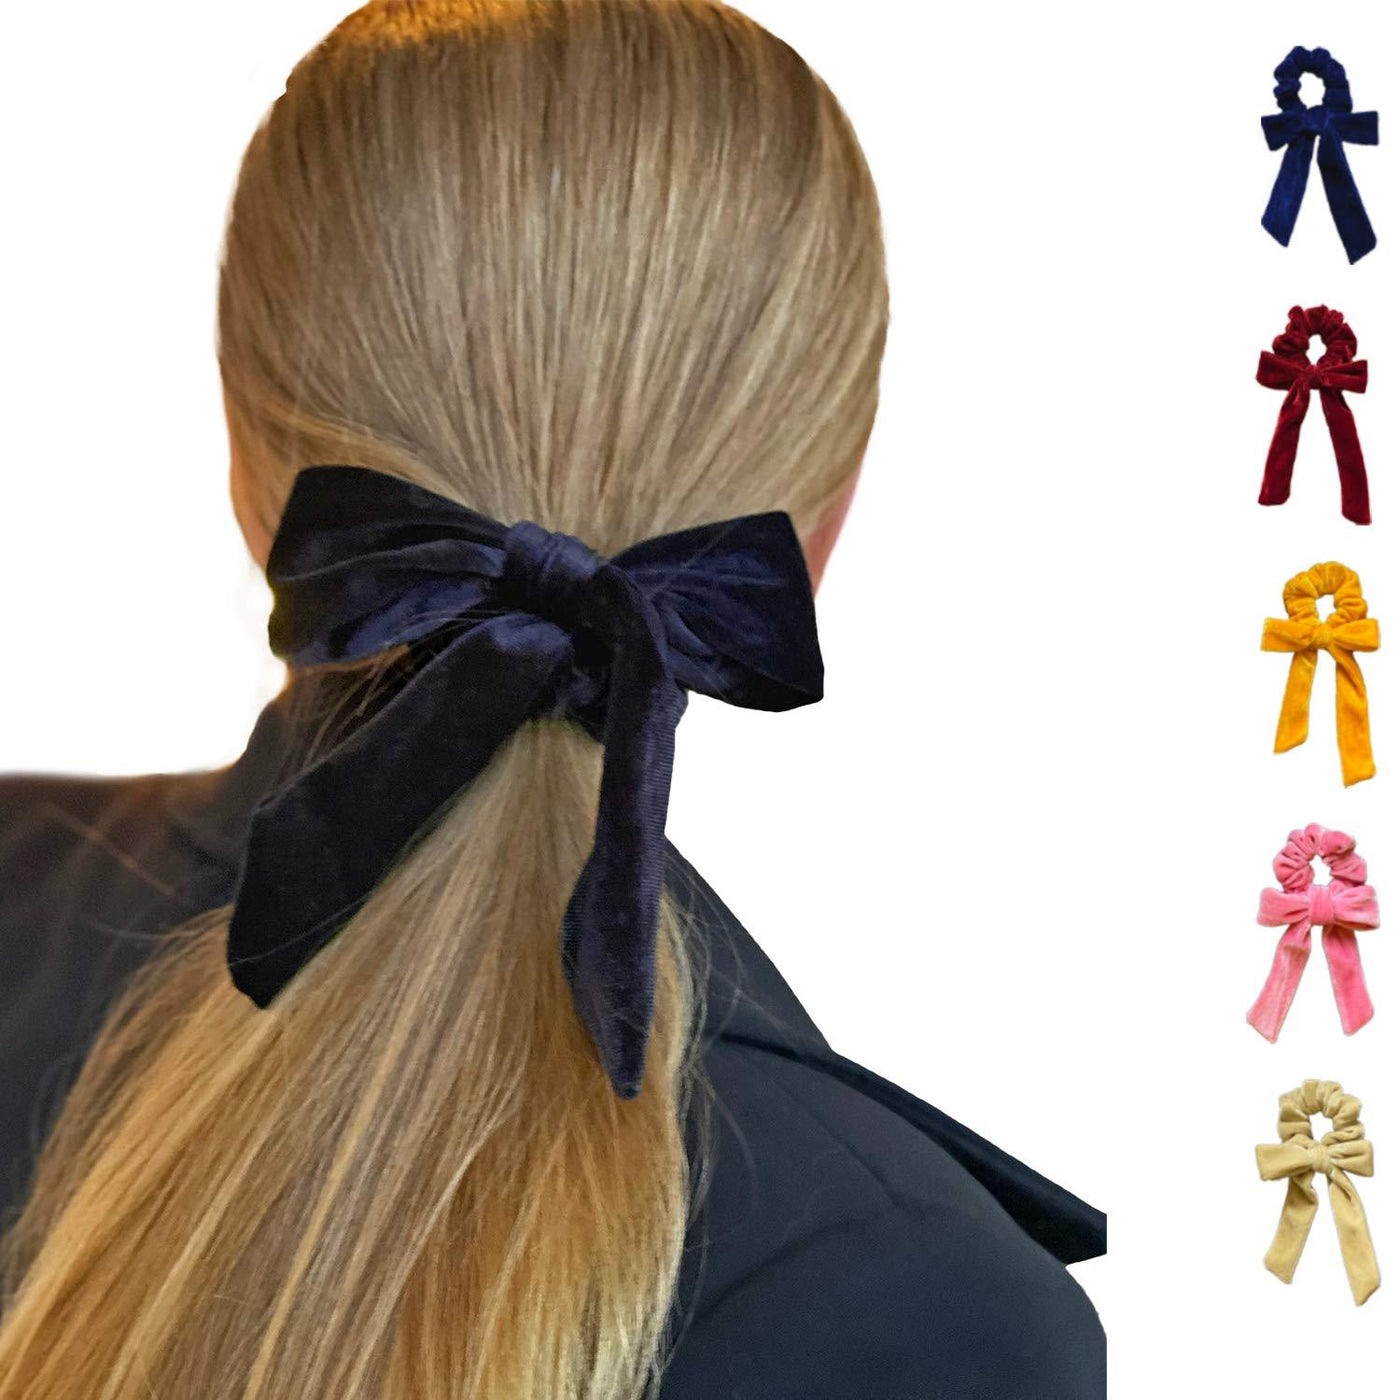 Luxury Velvet Bow Ribbon Scarf Scrunchies Pack of 5 - Solid Colors - silvrbear